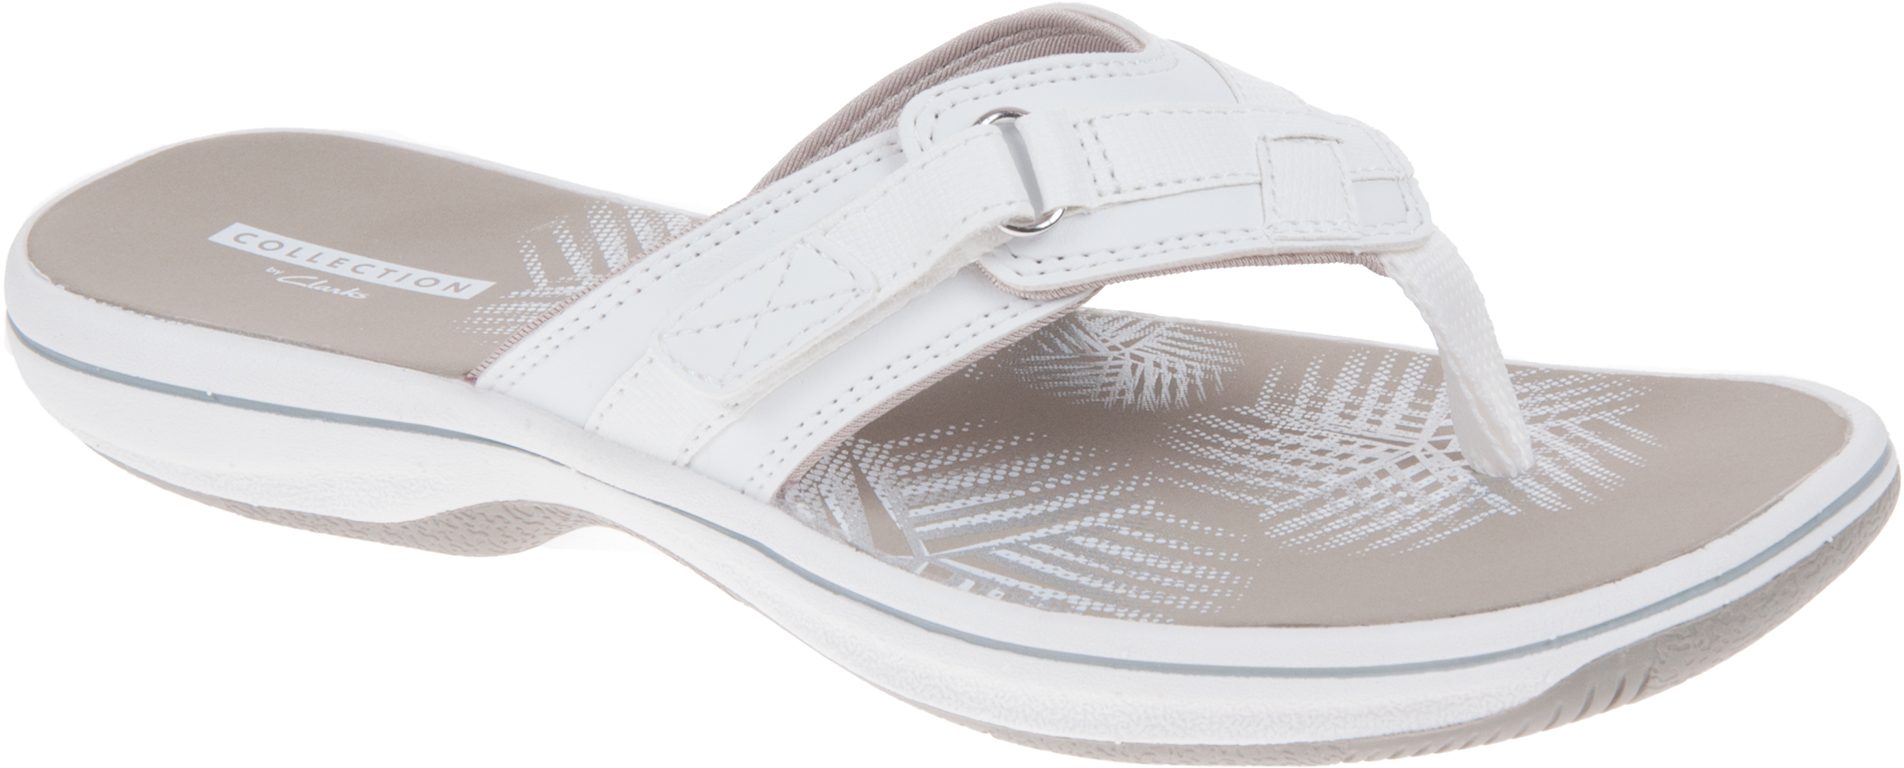 Clarks Brinkley Sea White Synthetic 26129301 - Toe Post Sandals ...